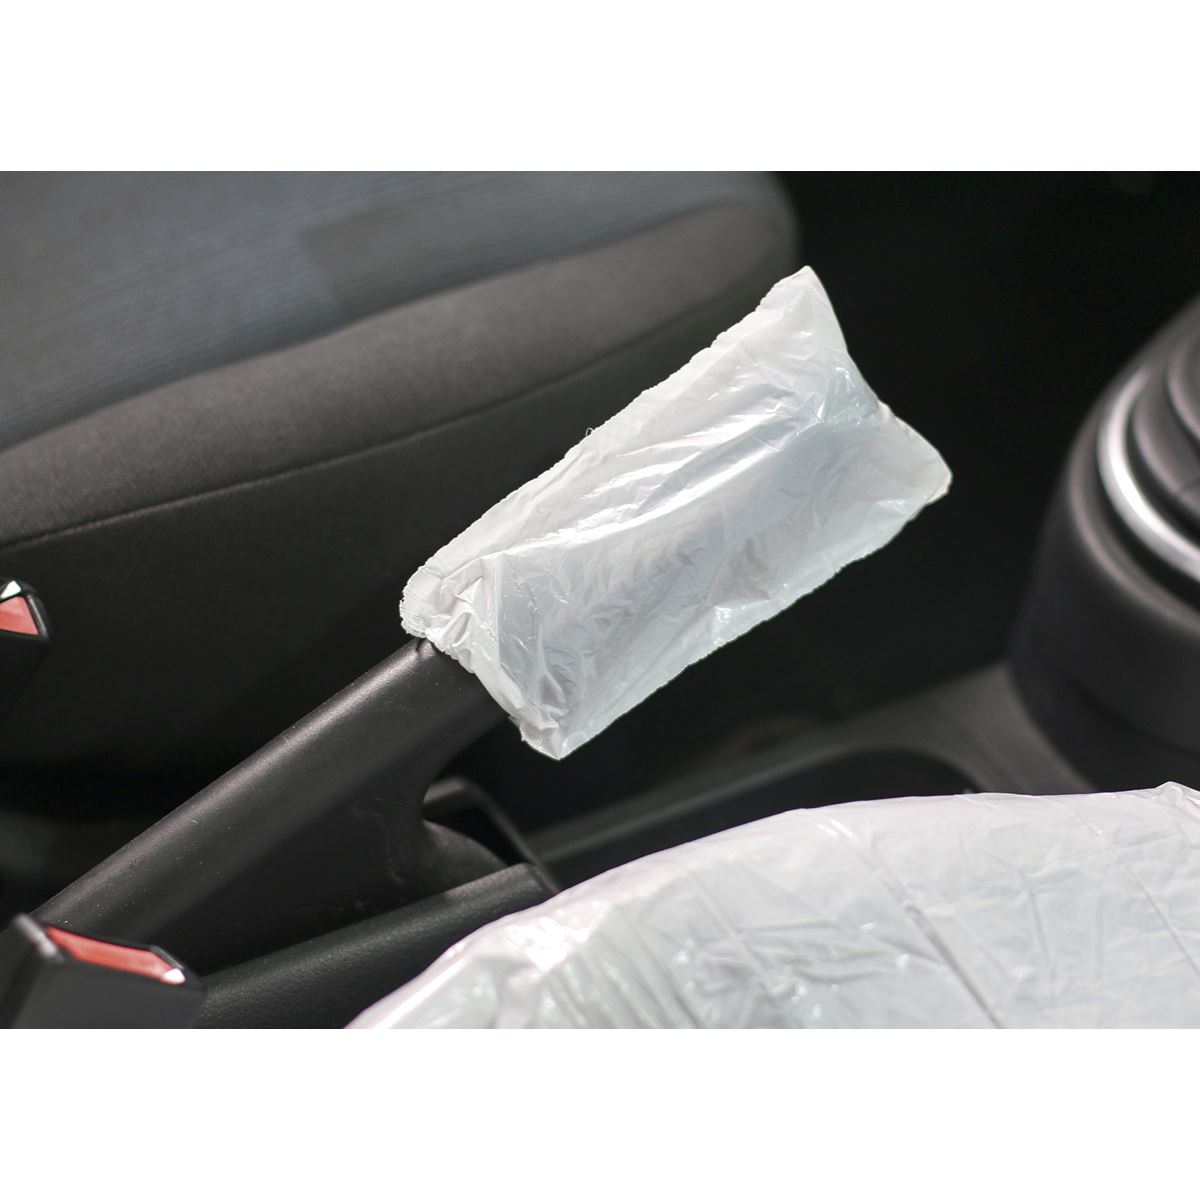 Sealey 5 in 1 Disposable Car Interior Protection Kit - Box of 50 Sets Seat Cover